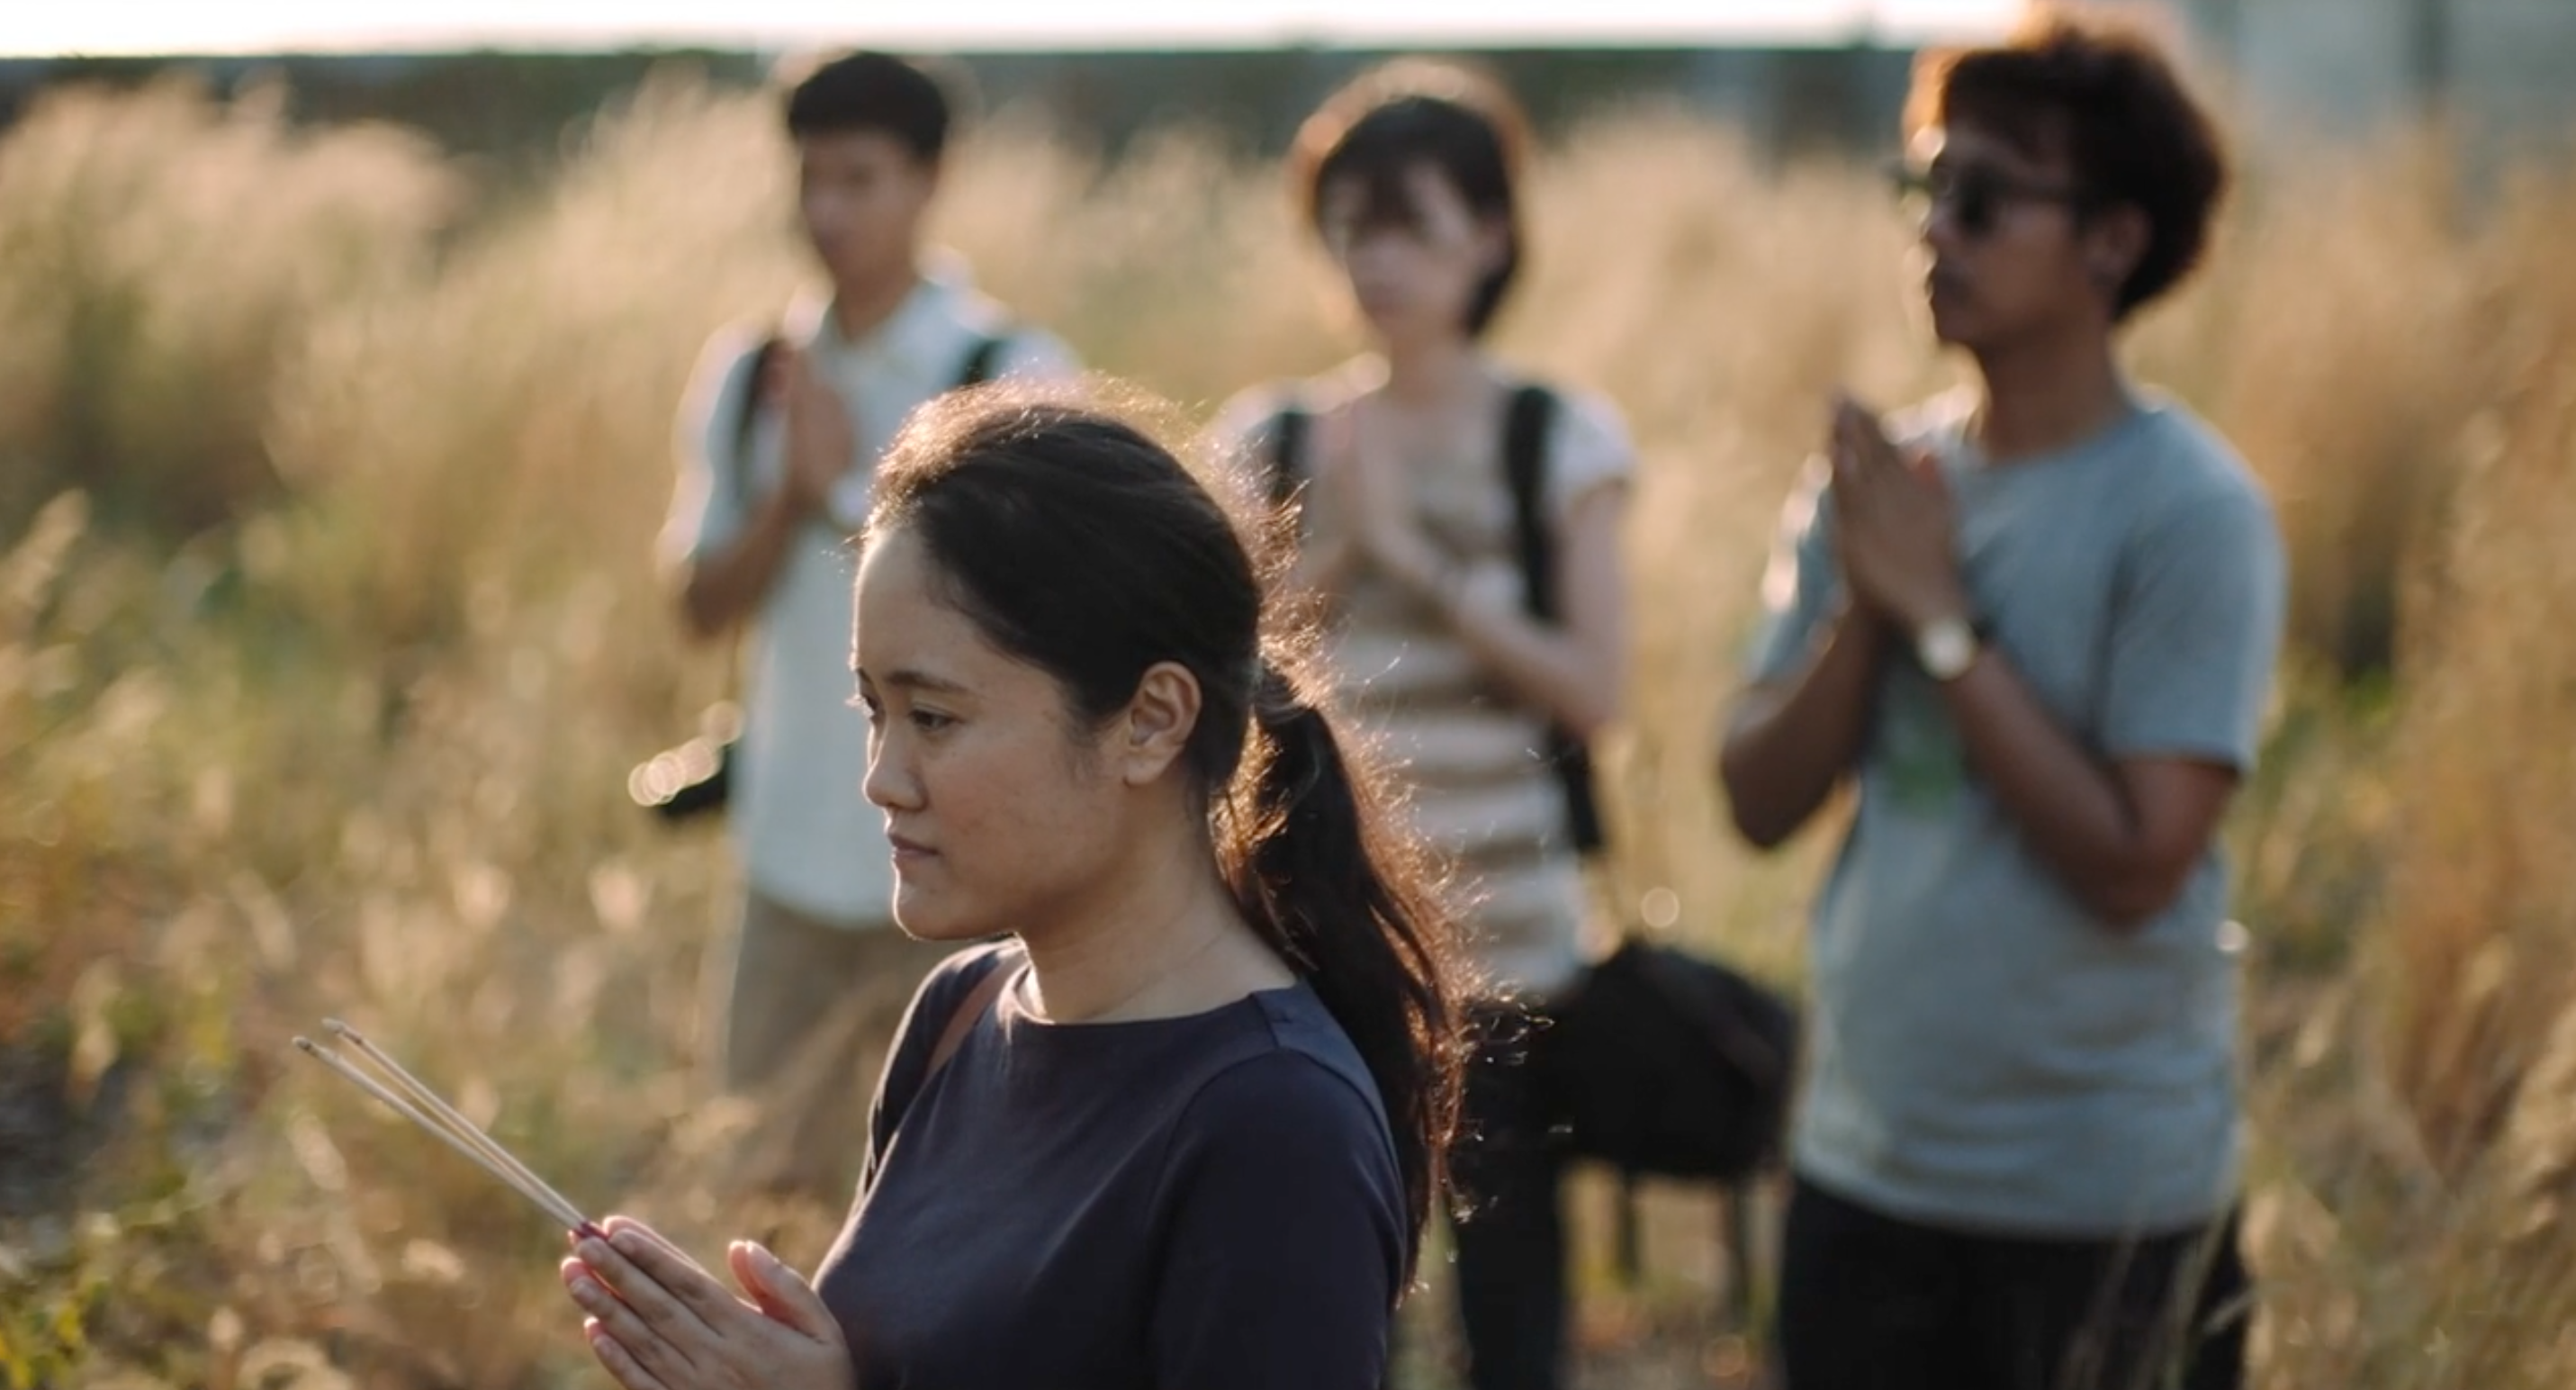 A still from the 2016 film "By the Time It Gets Dark", directed by Anocha Suwichakornpong, which shows four people standing in a field, with holds folded in prayer.